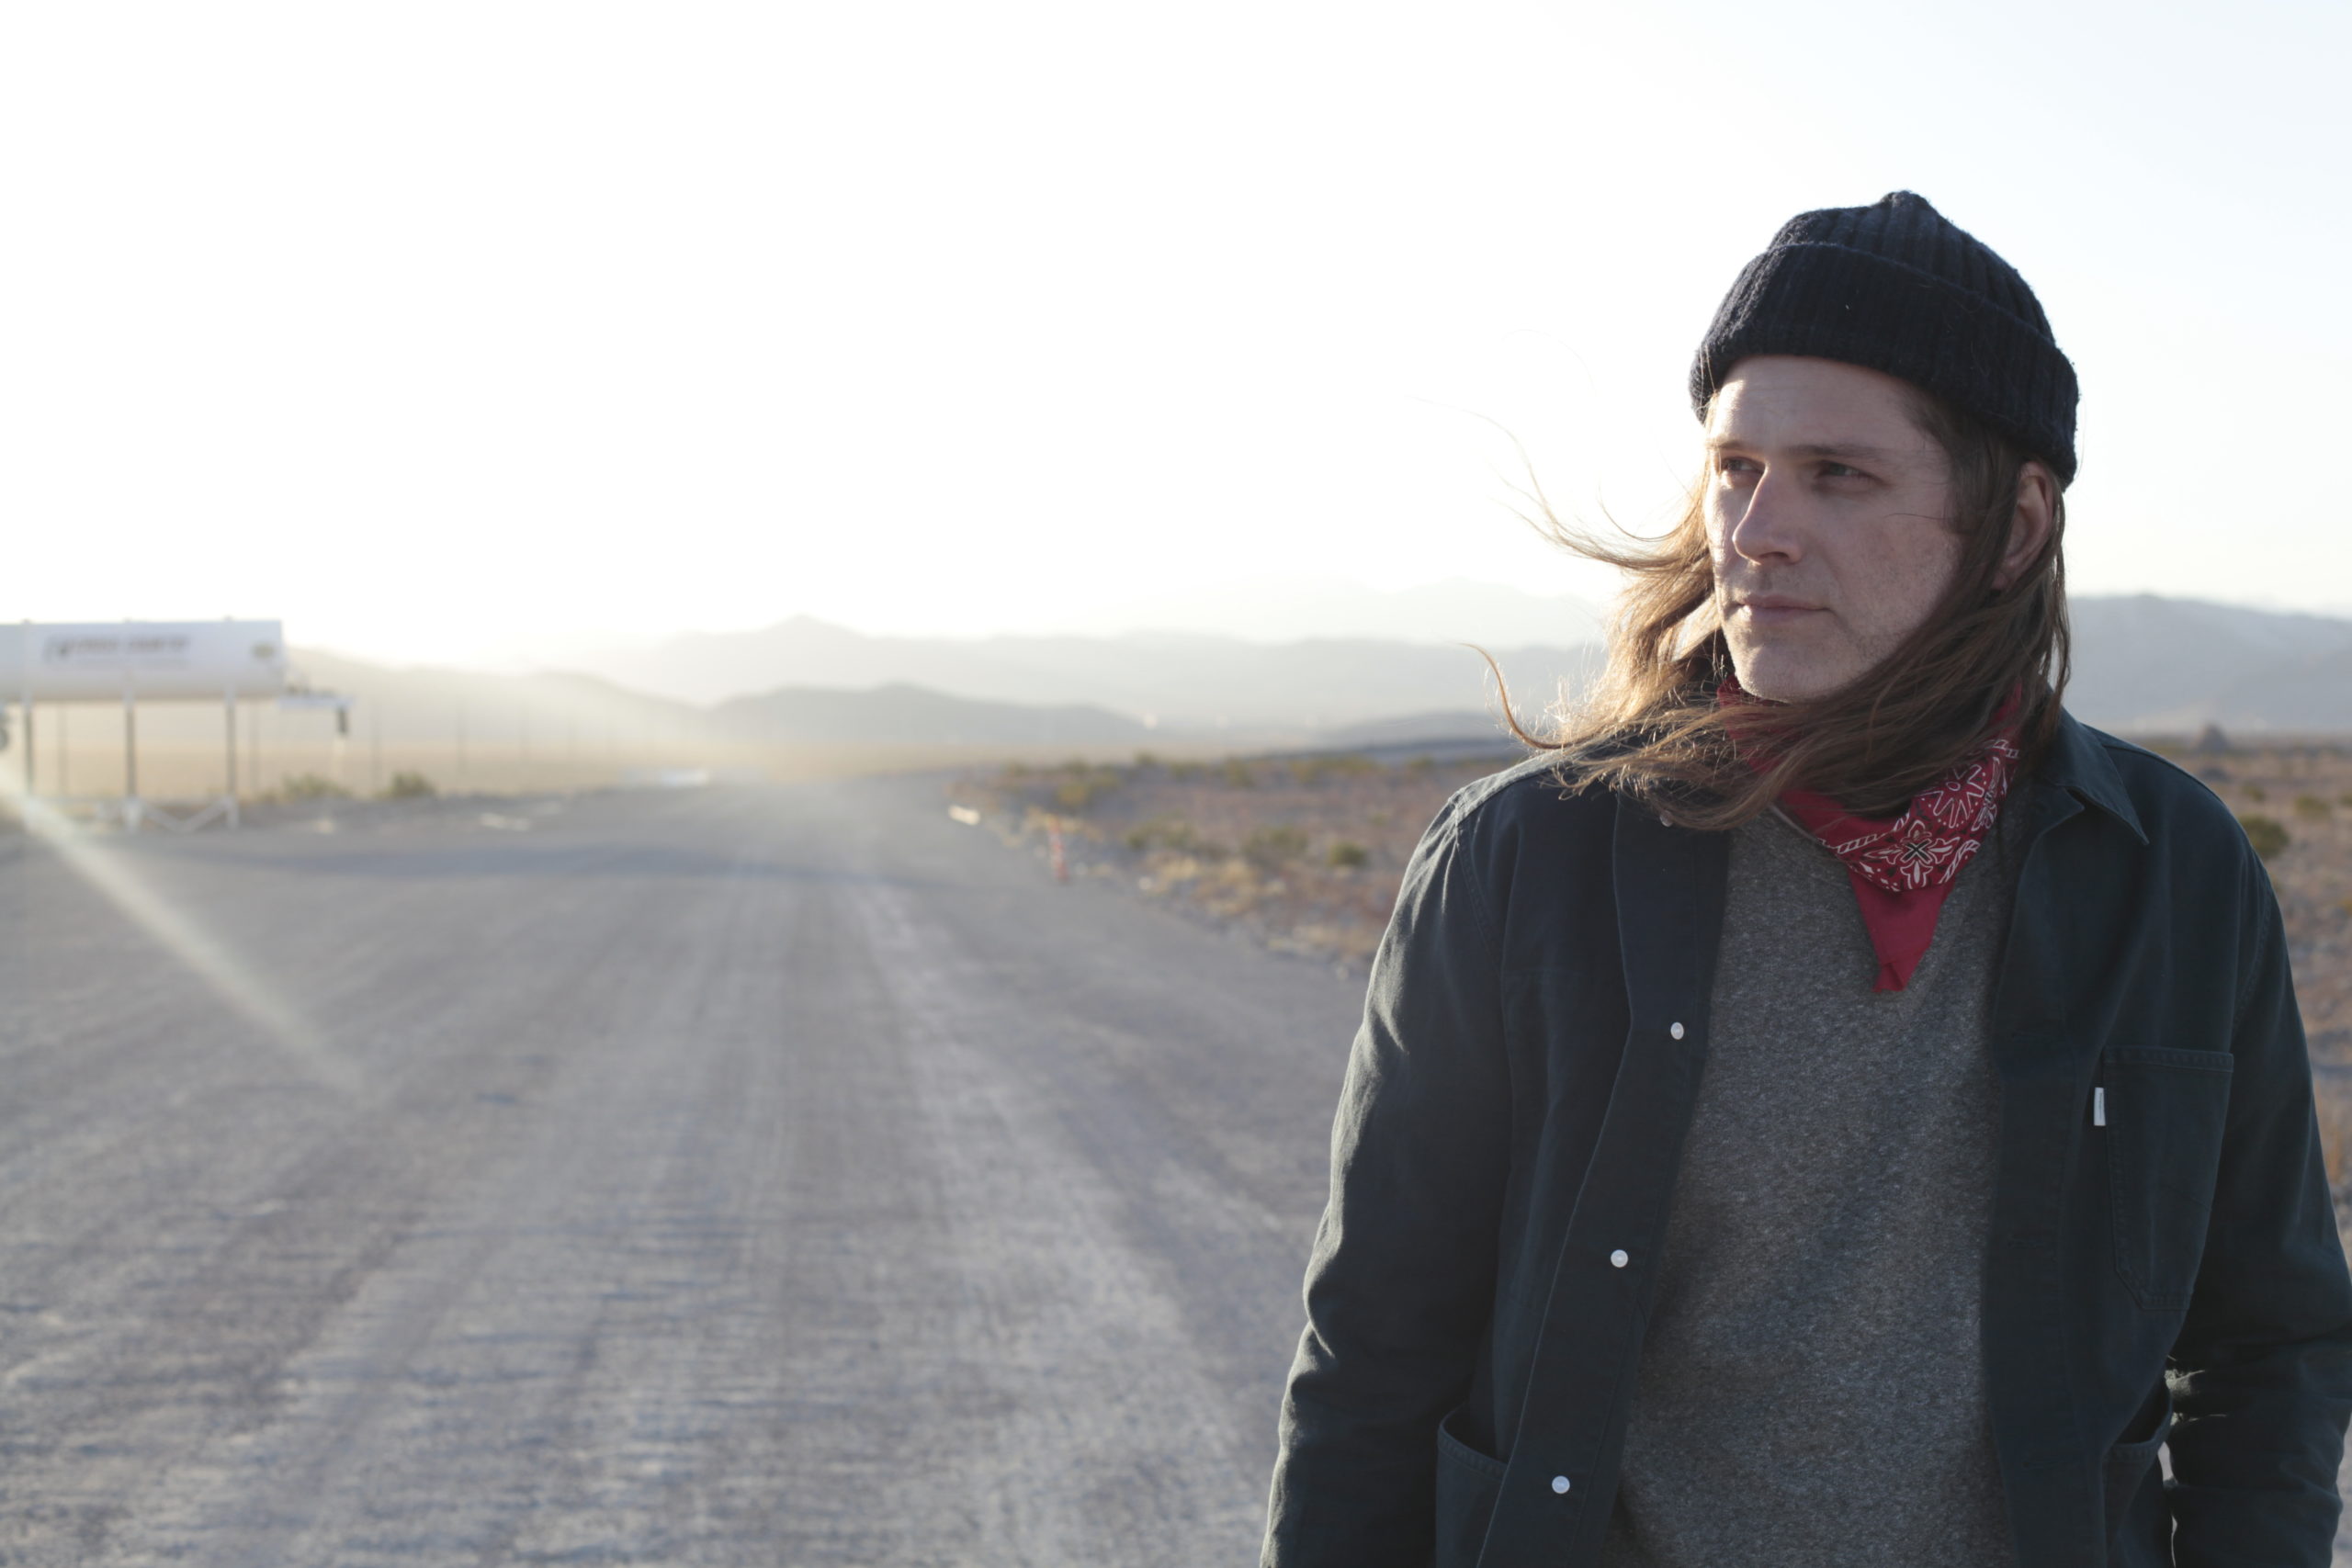 Track By Track: The Fruit Bats ‘The Pet Parade’